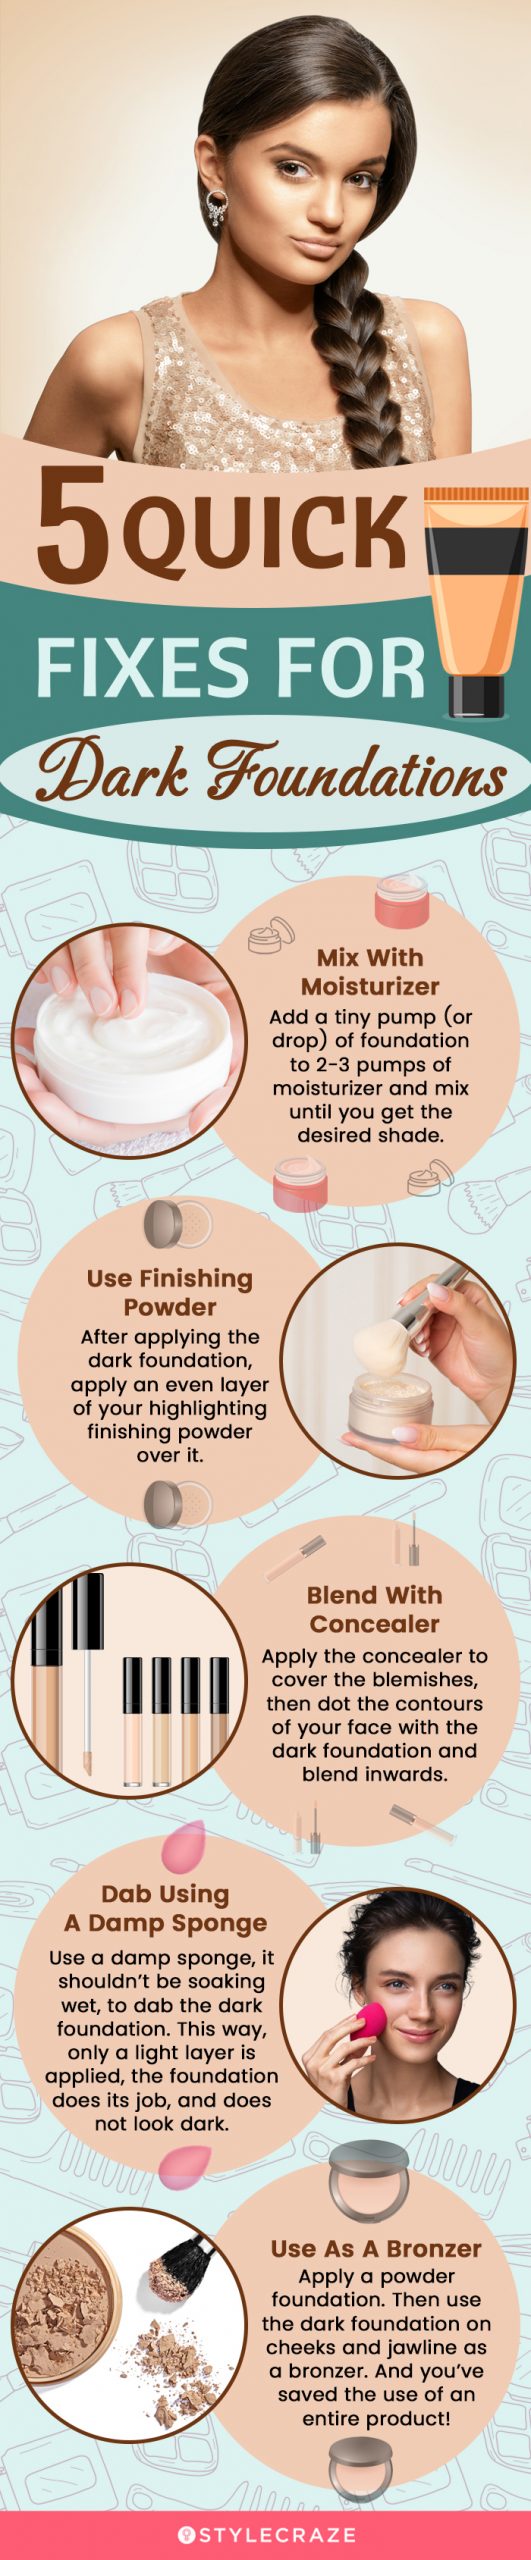 5 quick fixes for dark foundations (infographic)